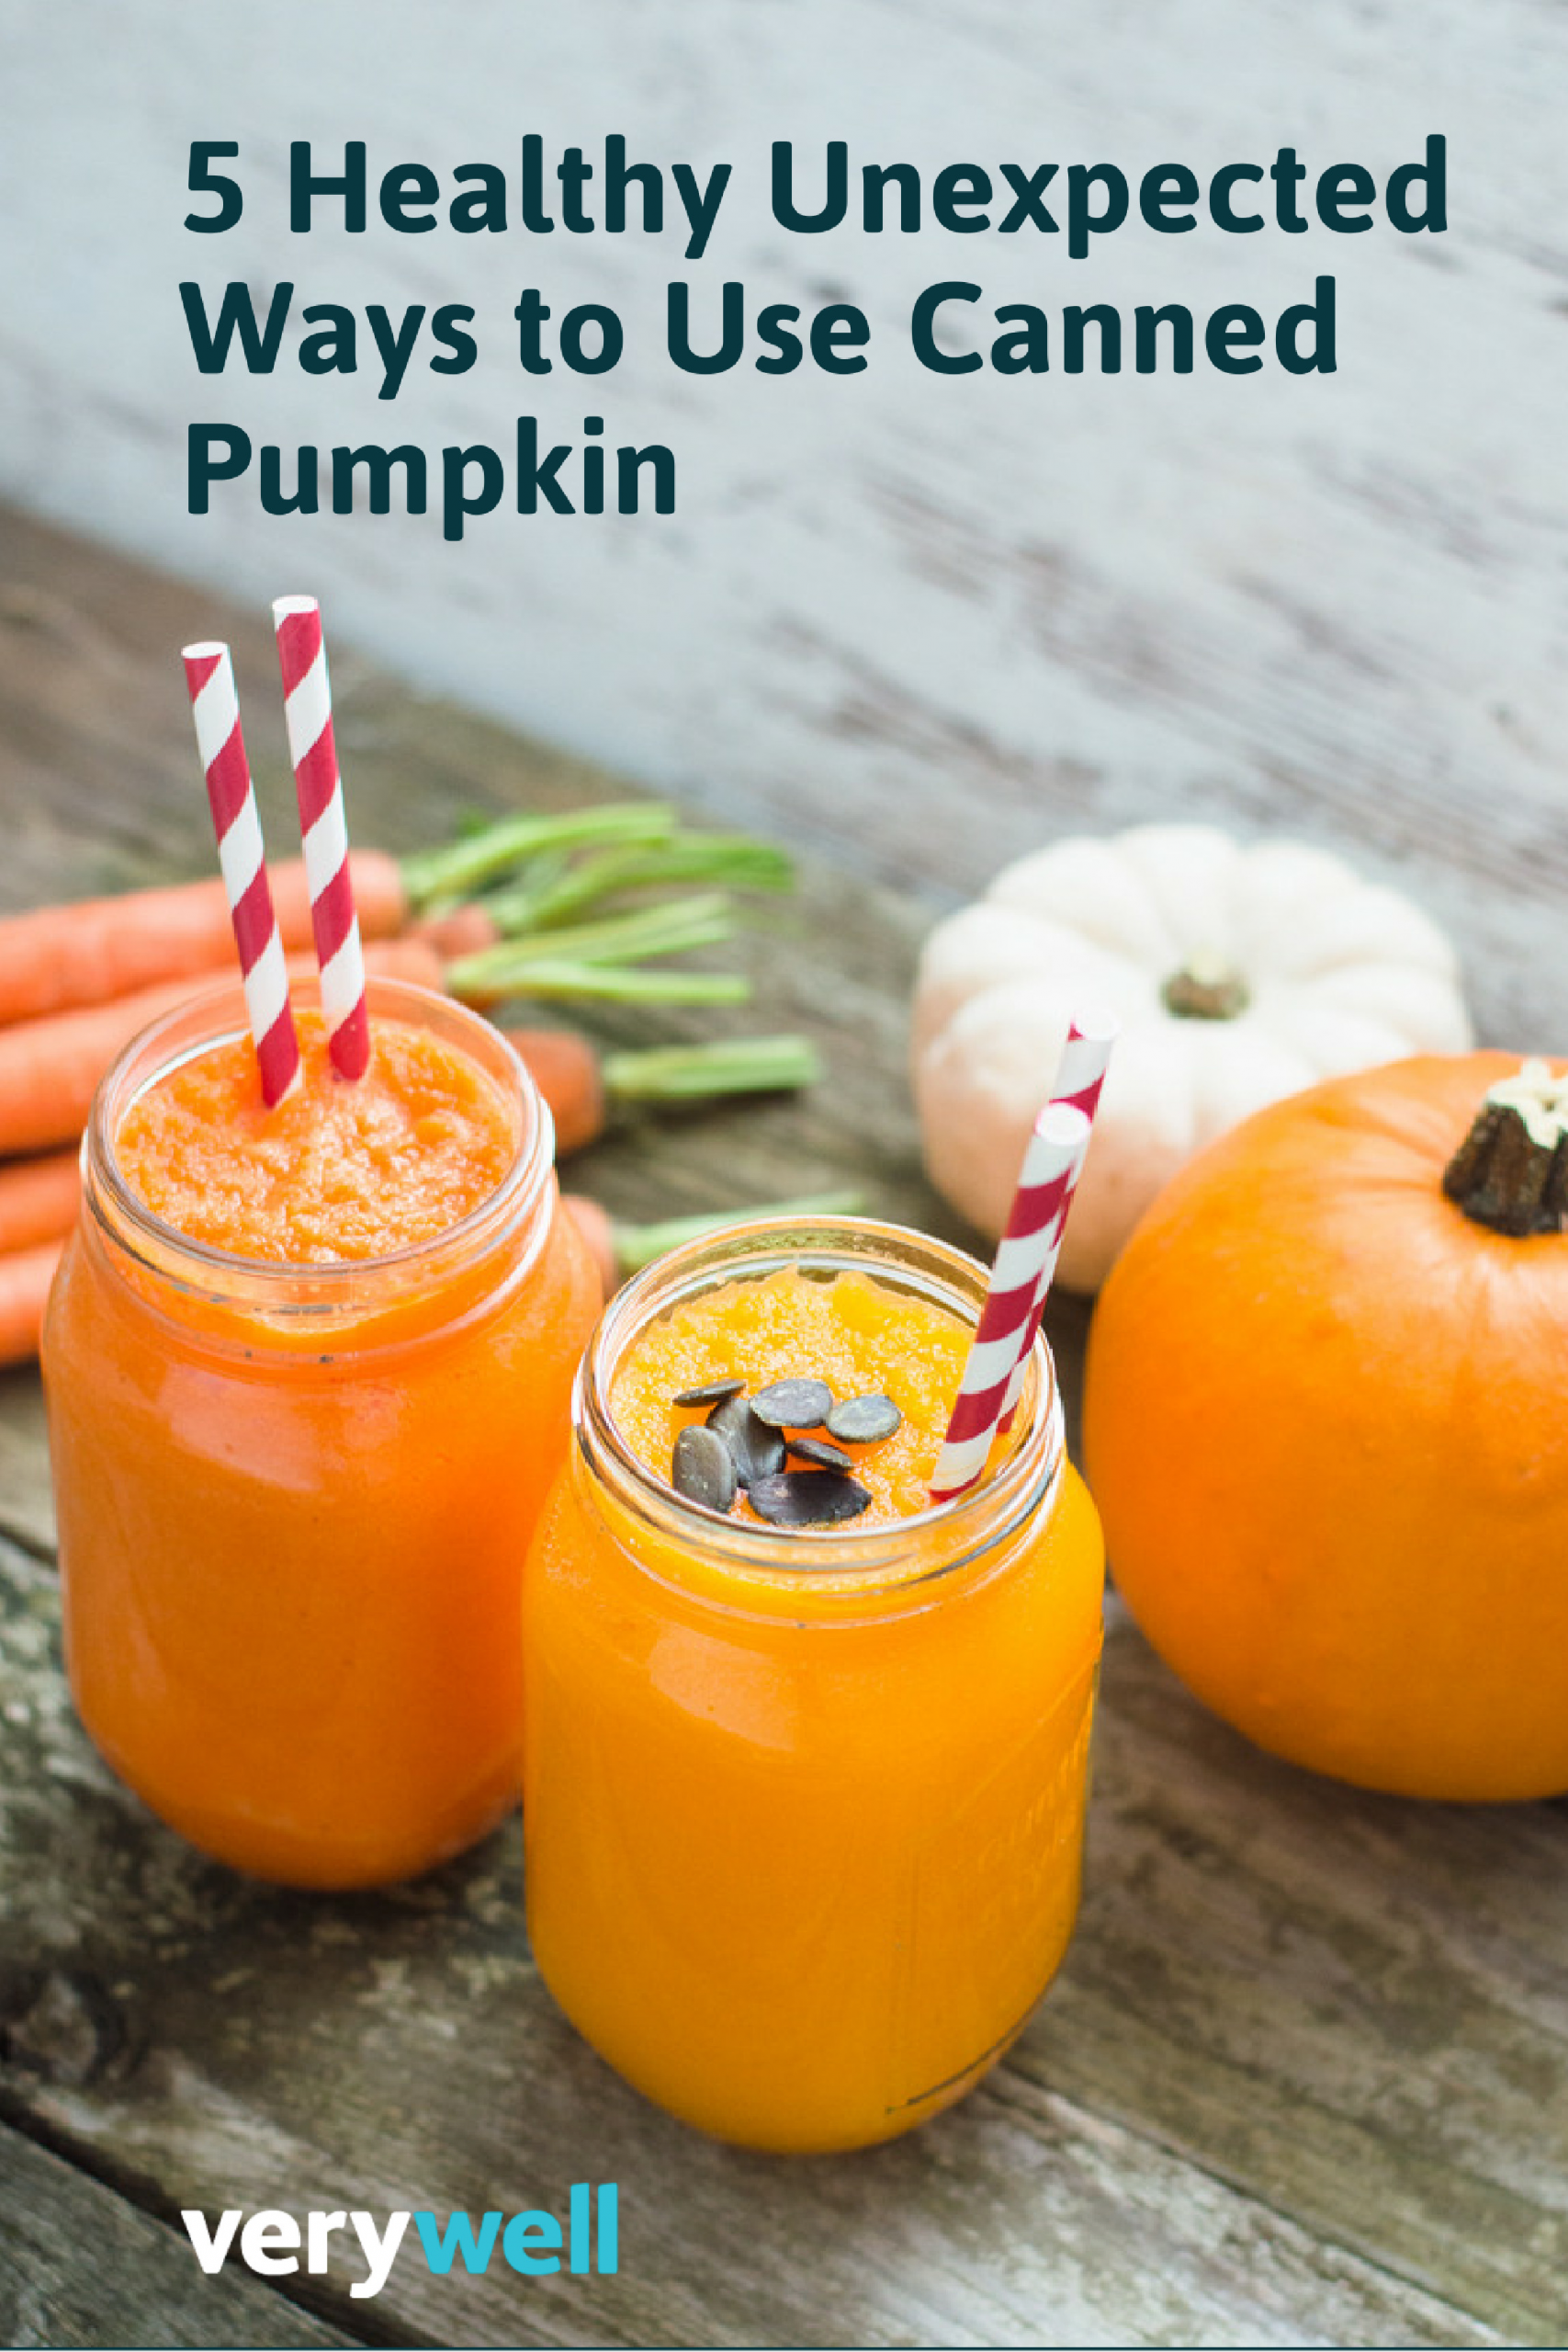 Low Calorie Canned Pumpkin Recipes
 Get Inspired to Eat Well